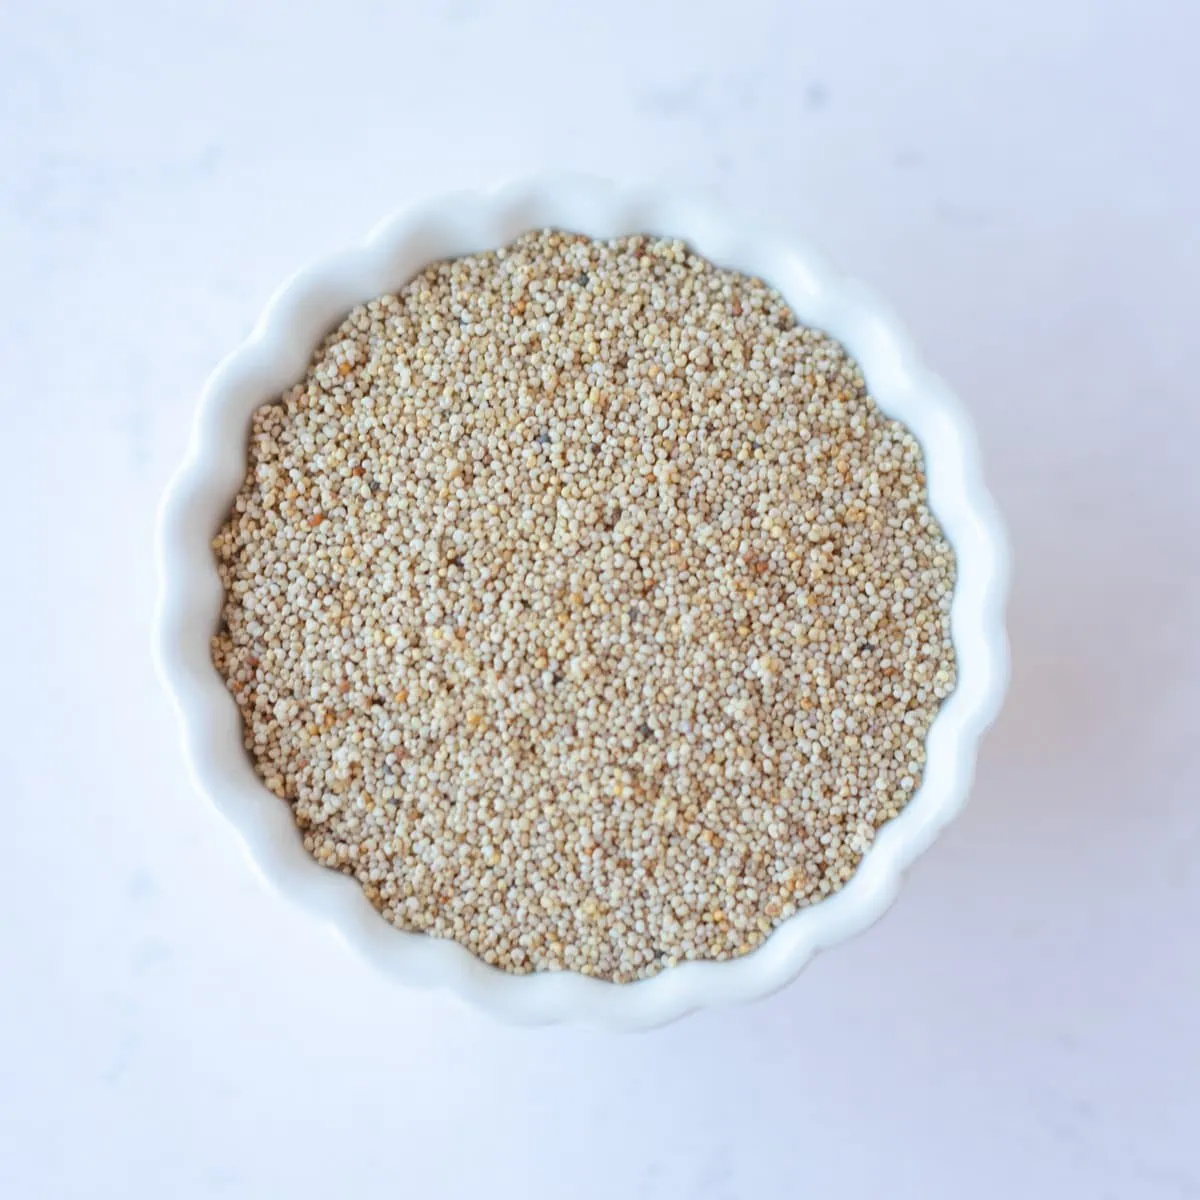 Poppy seeds in a small white bowl.